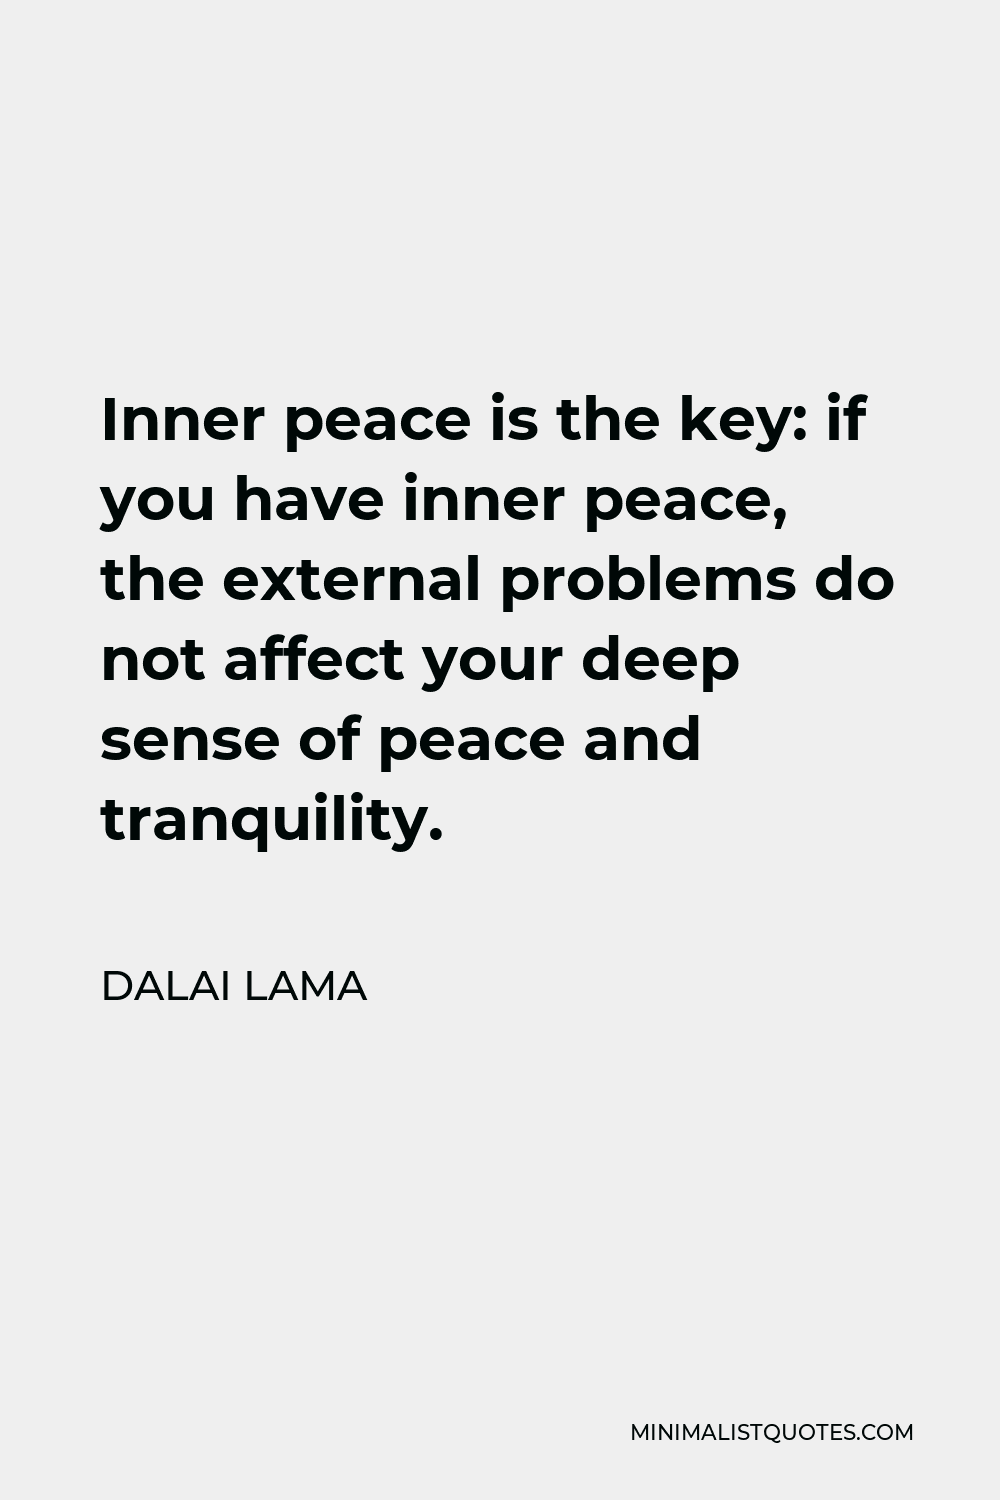 Dalai Lama Quote - Inner peace is the key: if you have inner peace, the external problems do not affect your deep sense of peace and tranquility.